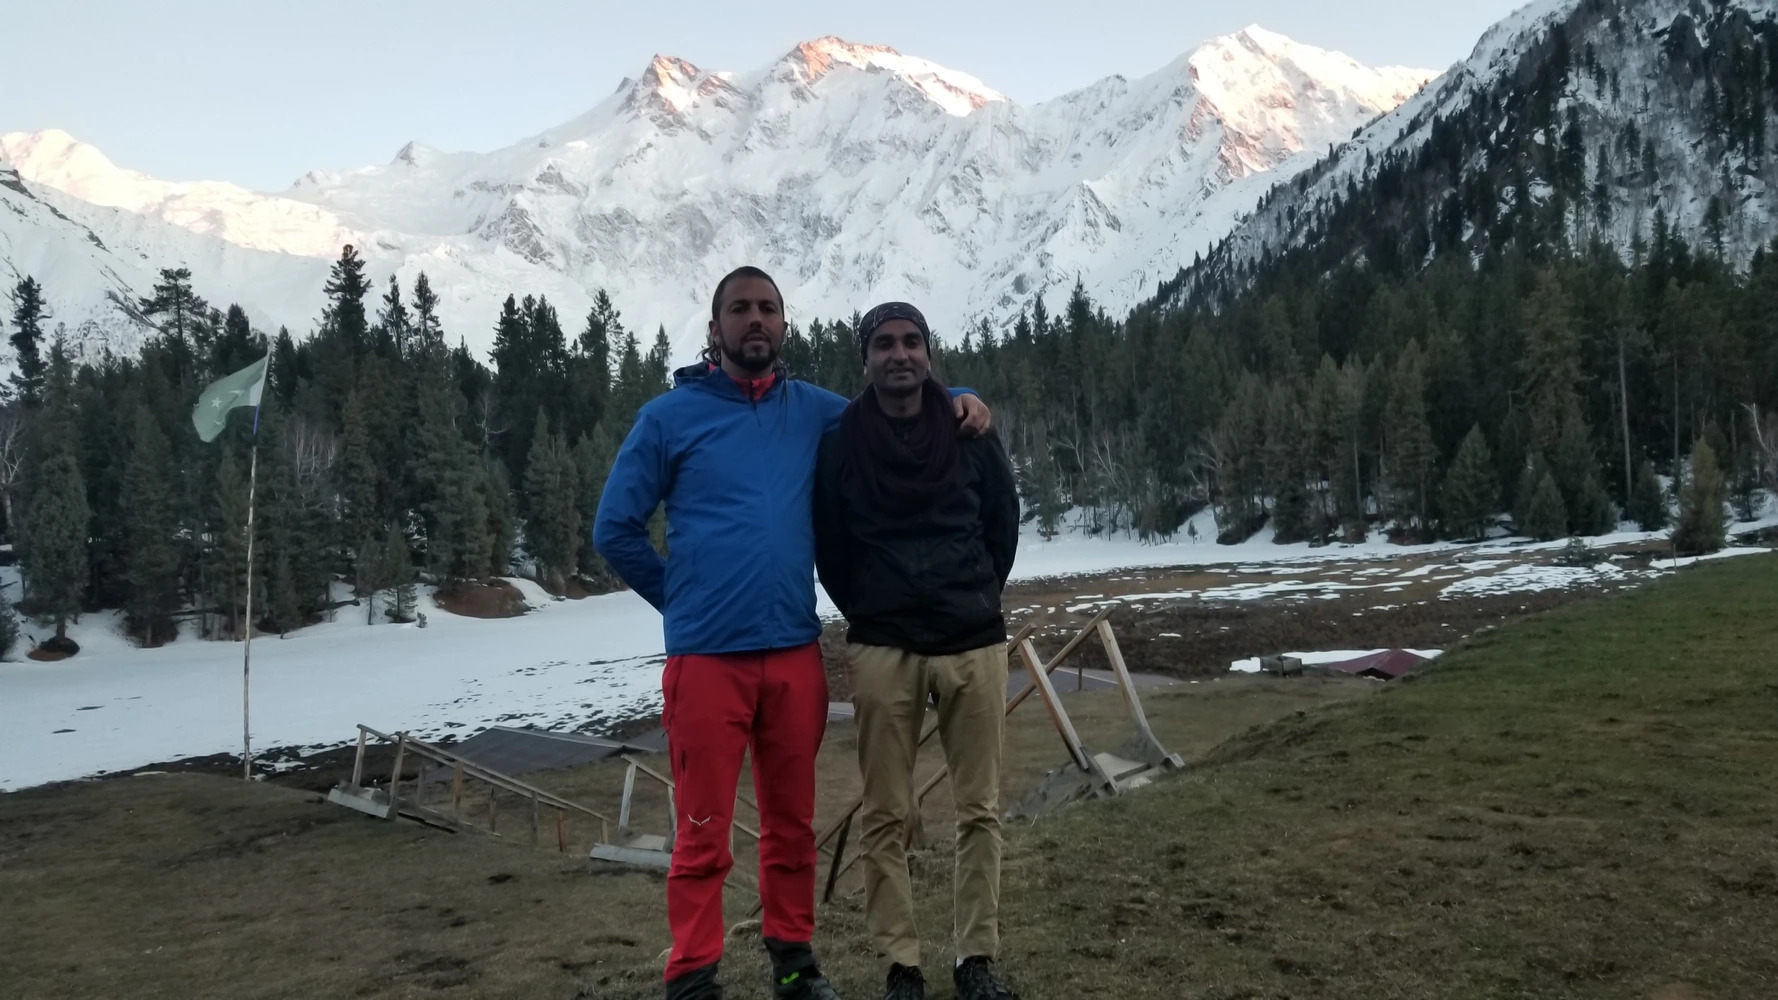 Trip to Fairy meadows at most amazing rates